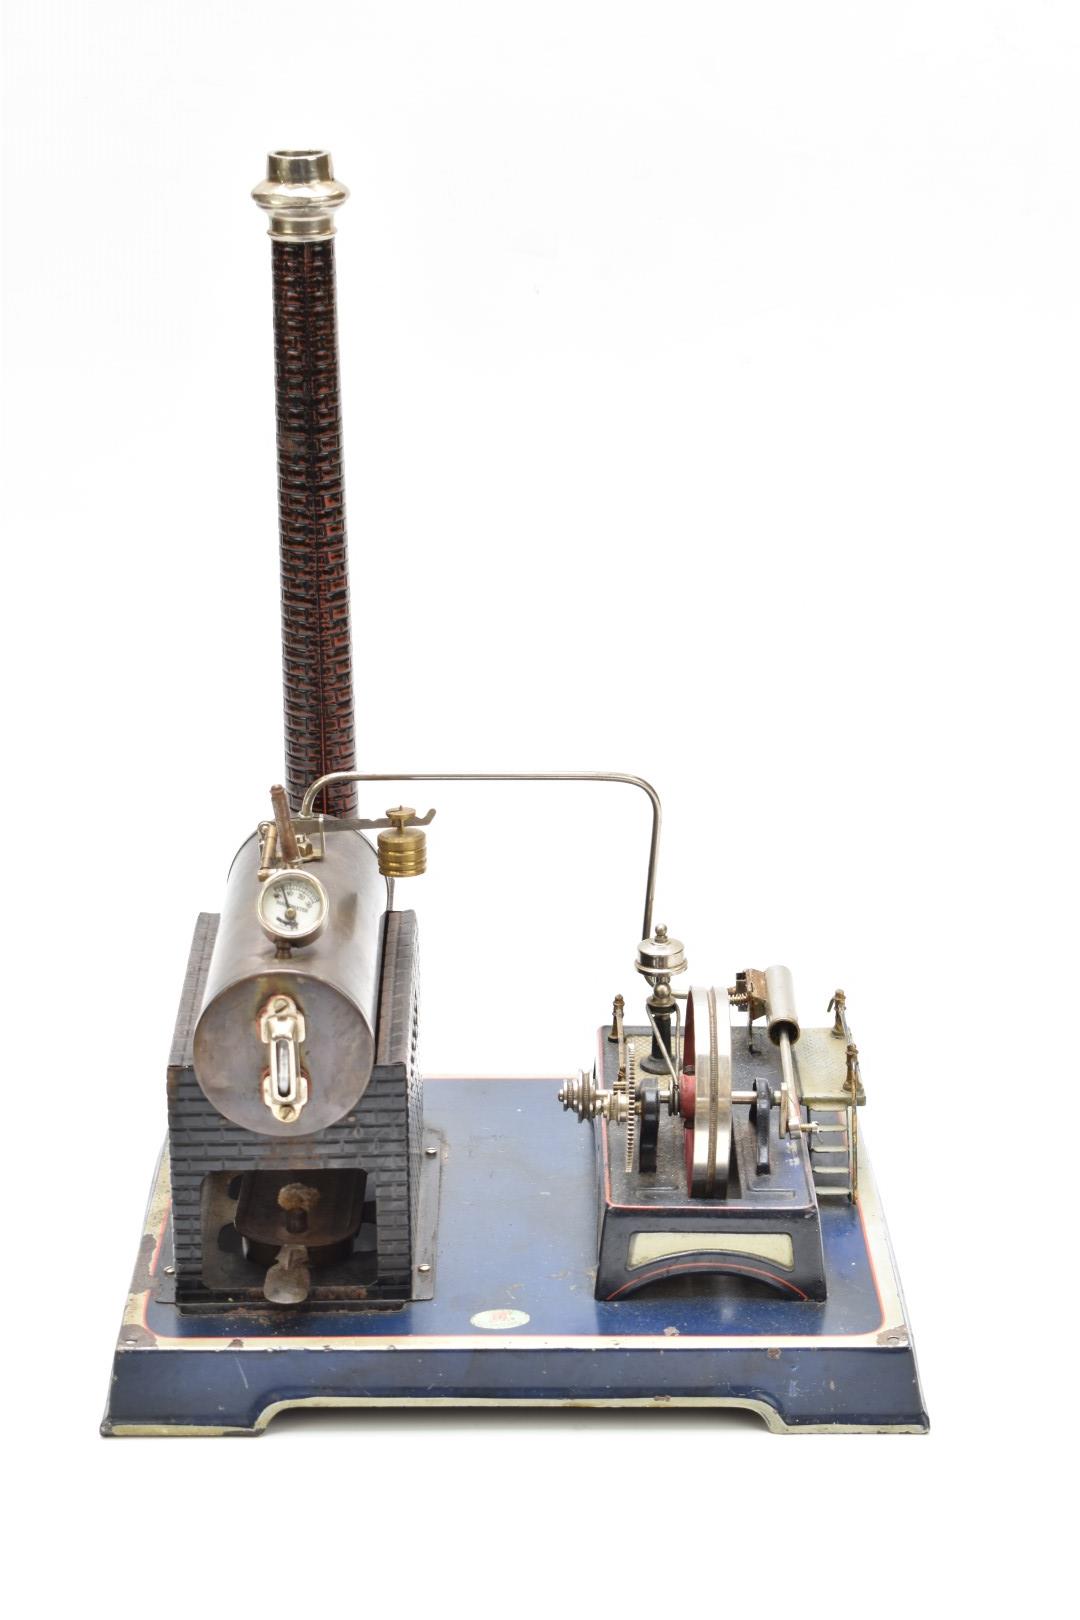 Doll and Cie stationary live steam engine, the boiler with faux brickwork base and chimney, the - Image 2 of 6